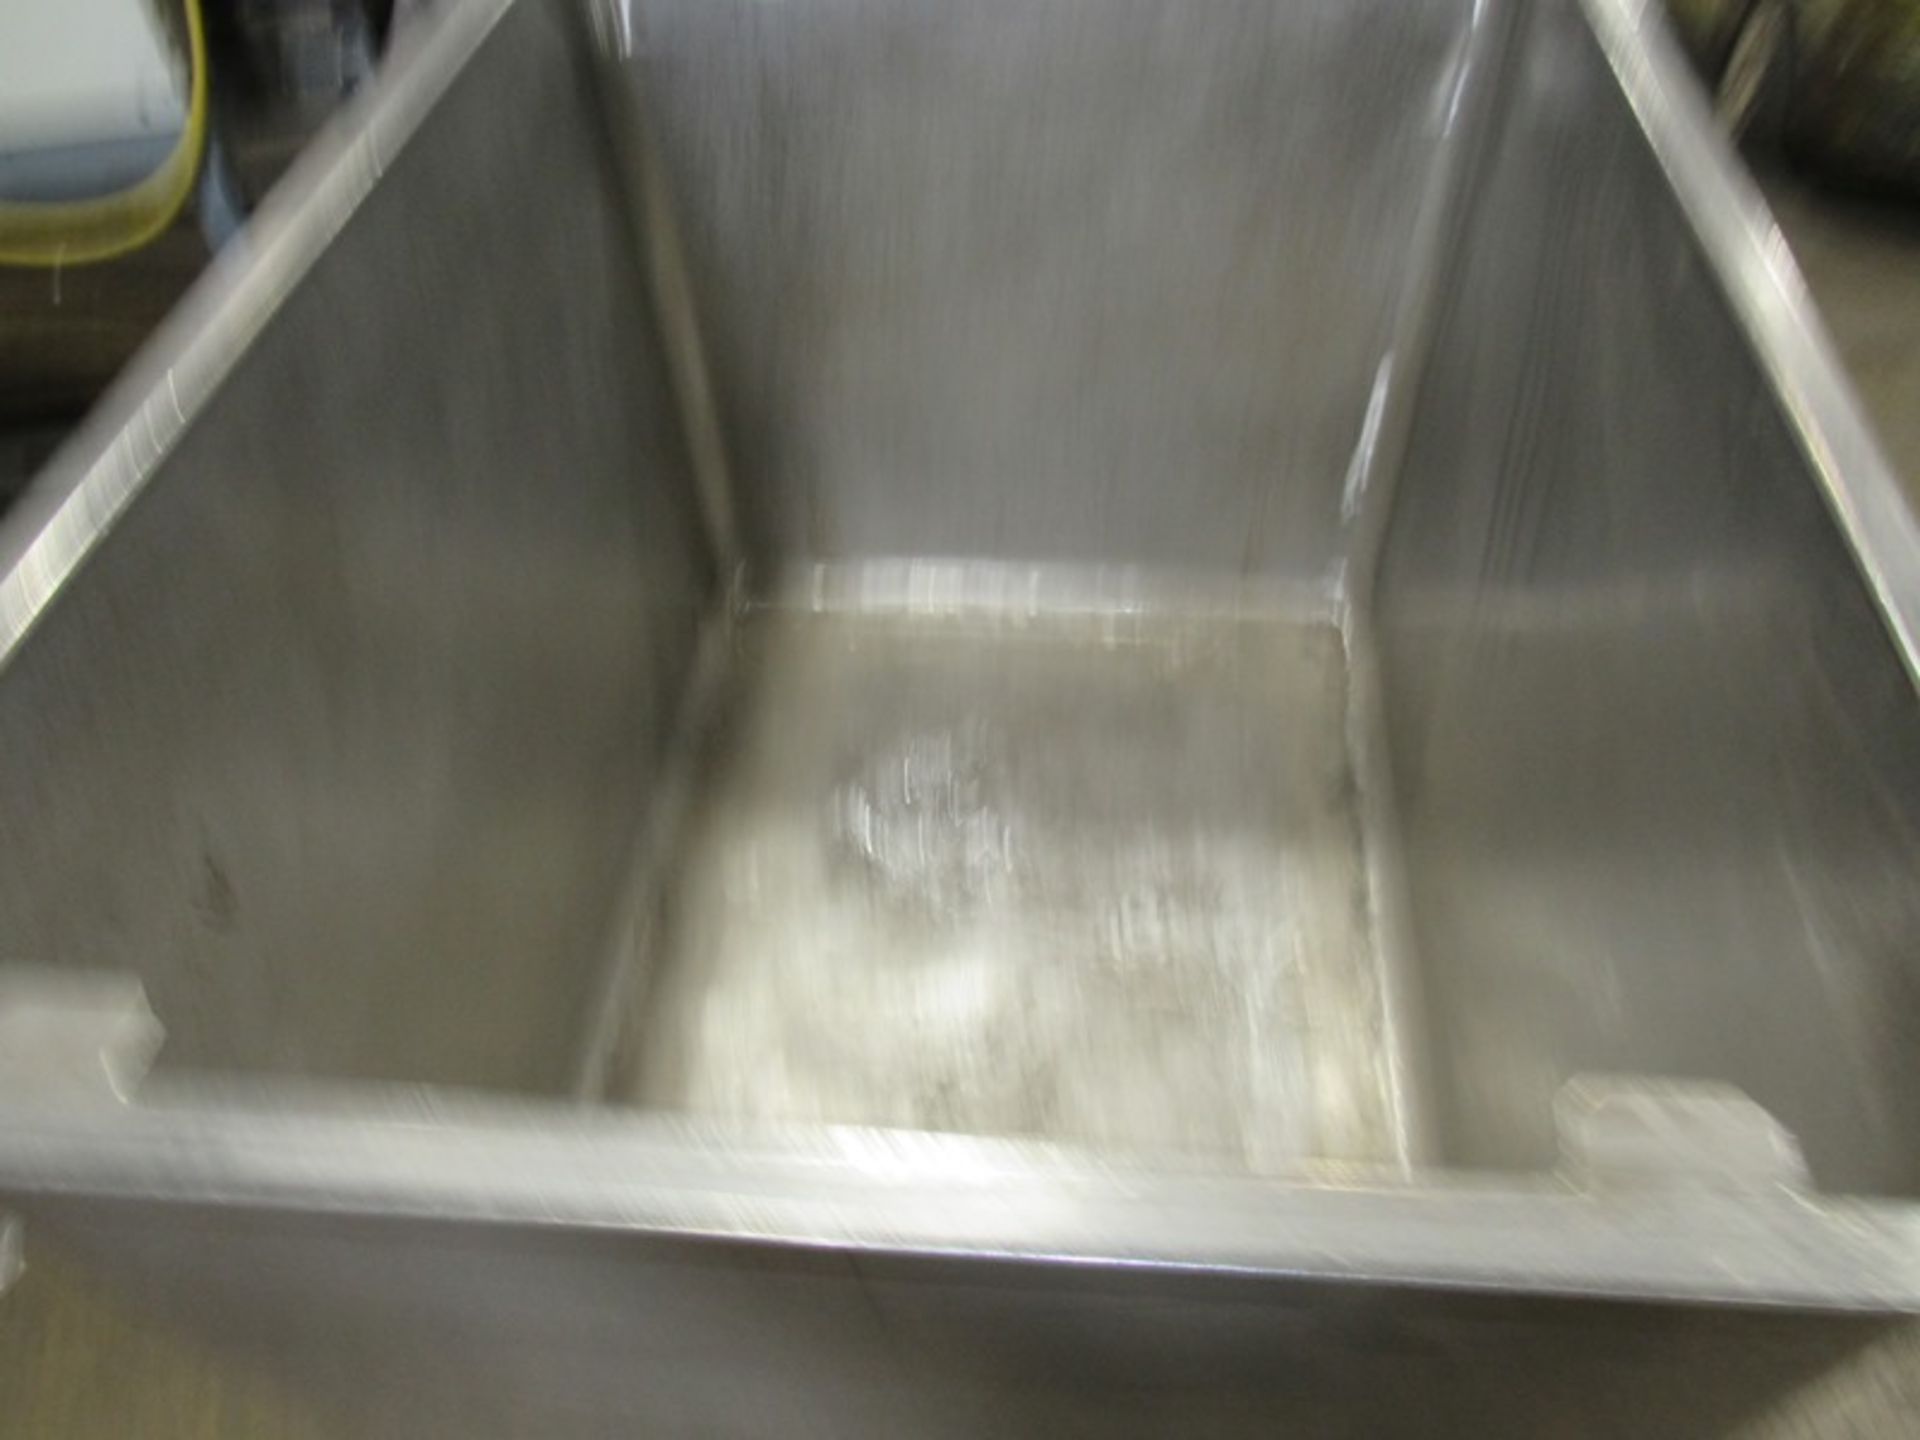 Lot Stainless Steel Vats, (1) 36" W X 48" L X 36" D & (1) 42" W X 48" L X 36" D, Located in Plano, - Image 2 of 3